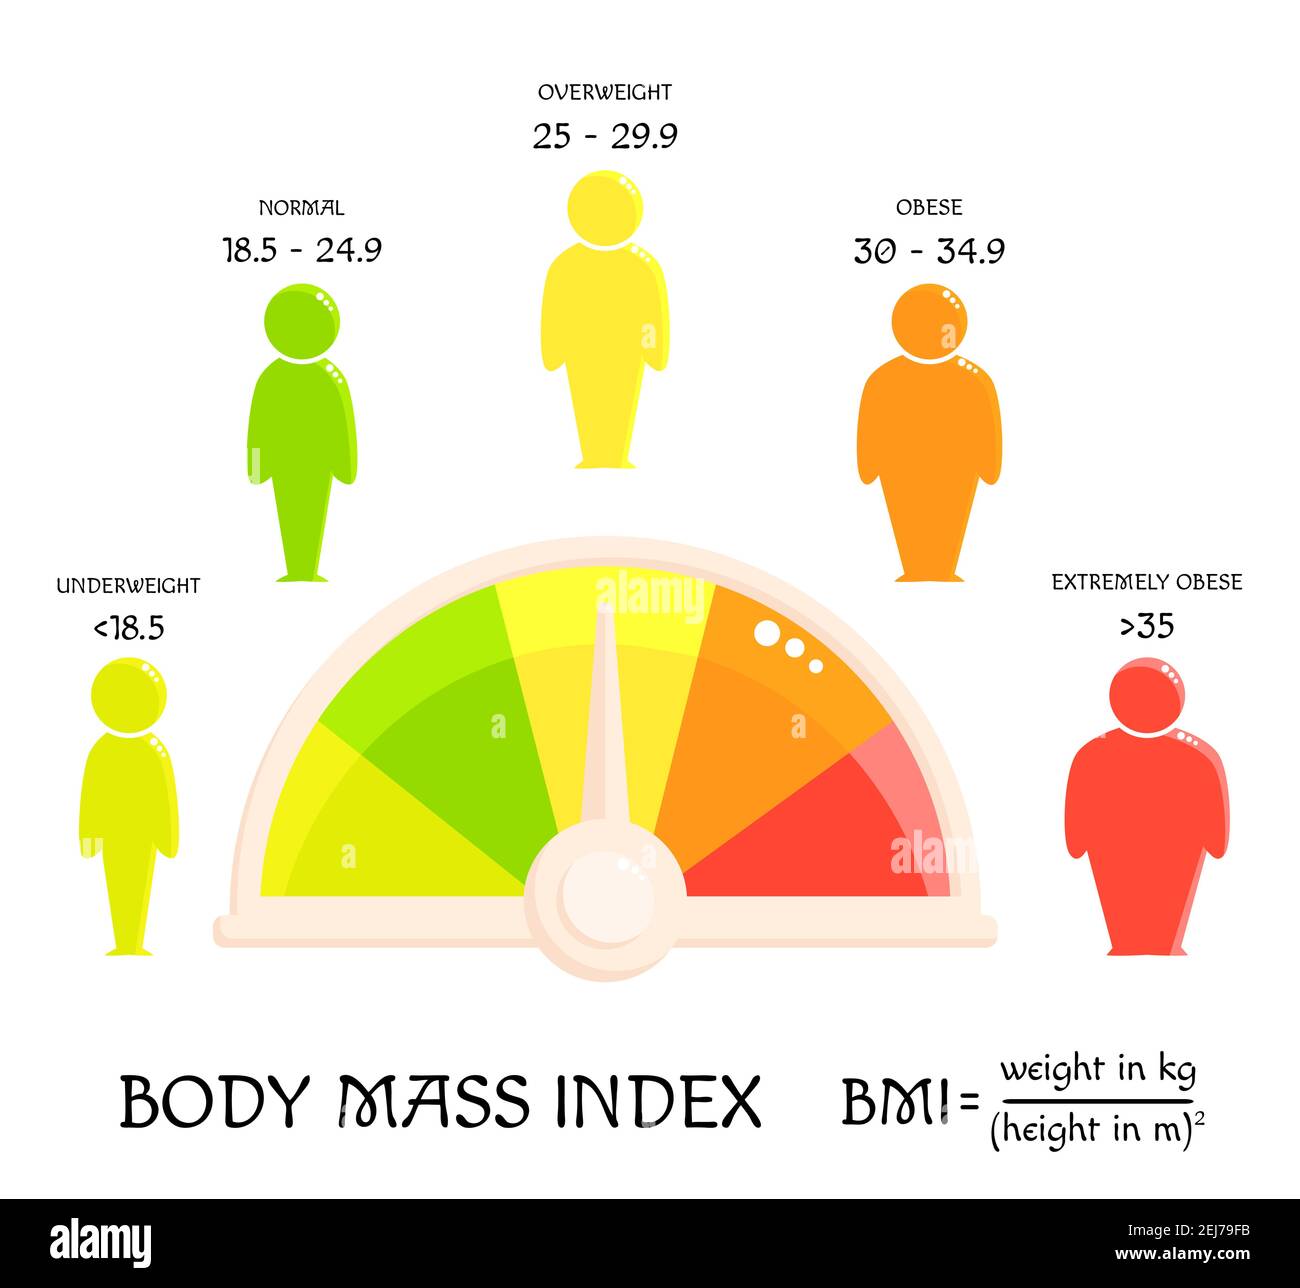 https://c8.alamy.com/comp/2EJ79FB/bmi-concept-body-shapes-from-underweight-to-extremely-obese-weight-loss-silhouettes-with-different-obesity-degrees-and-rating-scale-human-icons-sh-2EJ79FB.jpg